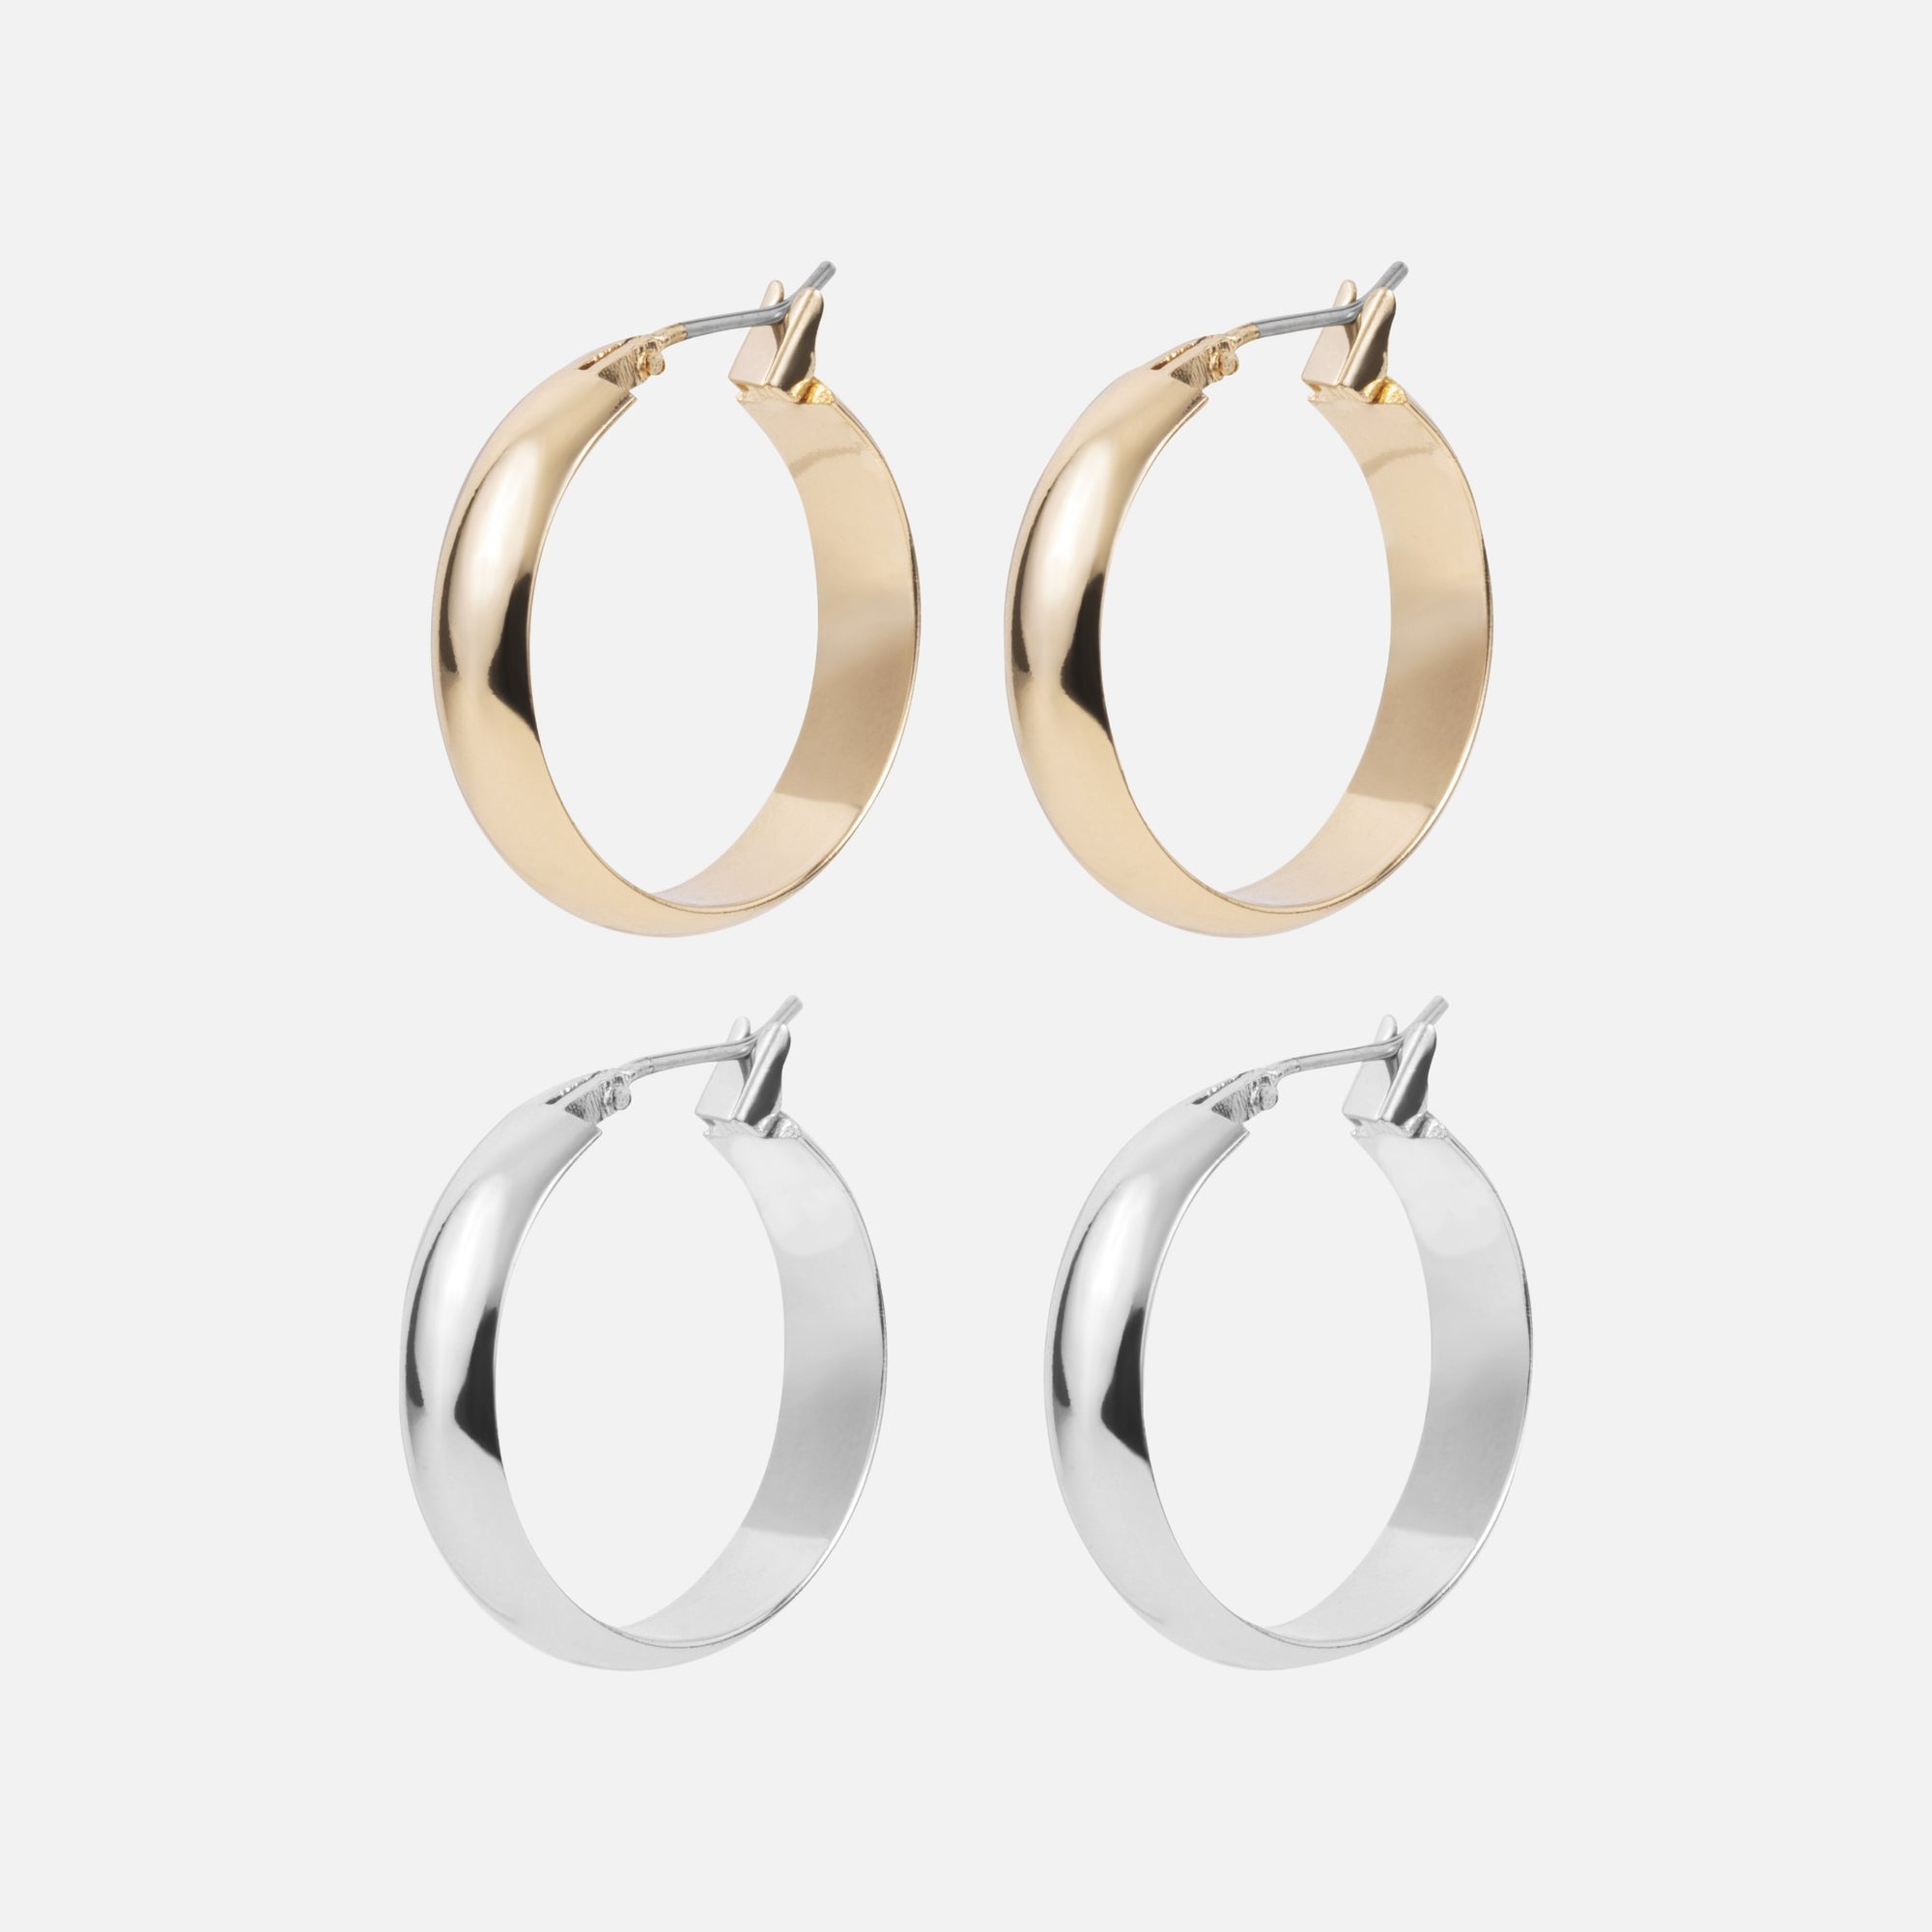 Set of two classic earrings